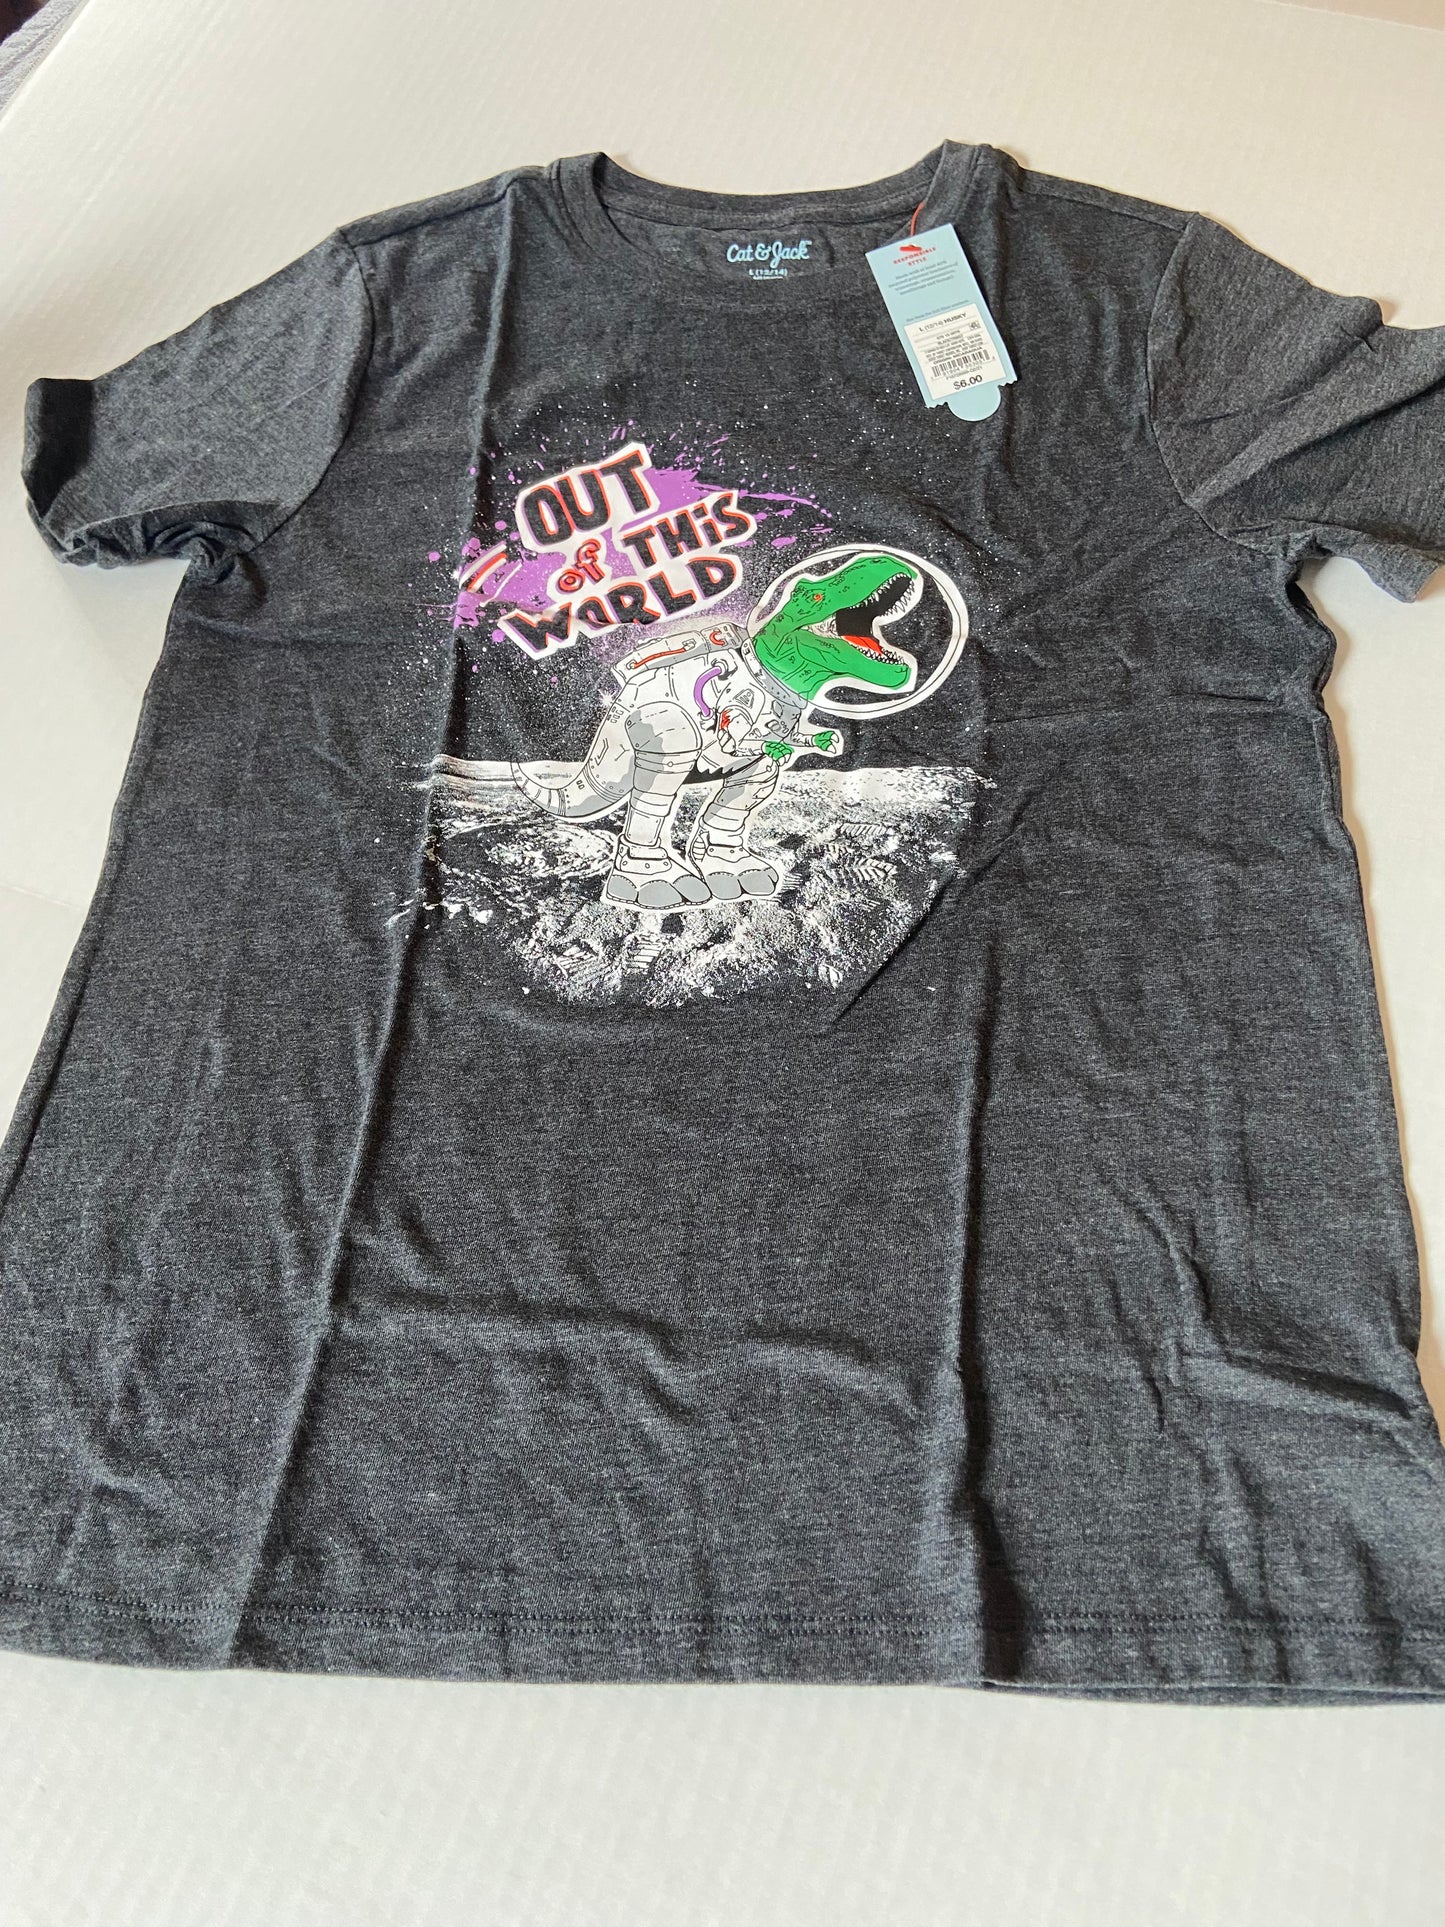 Large xxl 18 NWT, Cat & Jack Out of this World Dino shirt